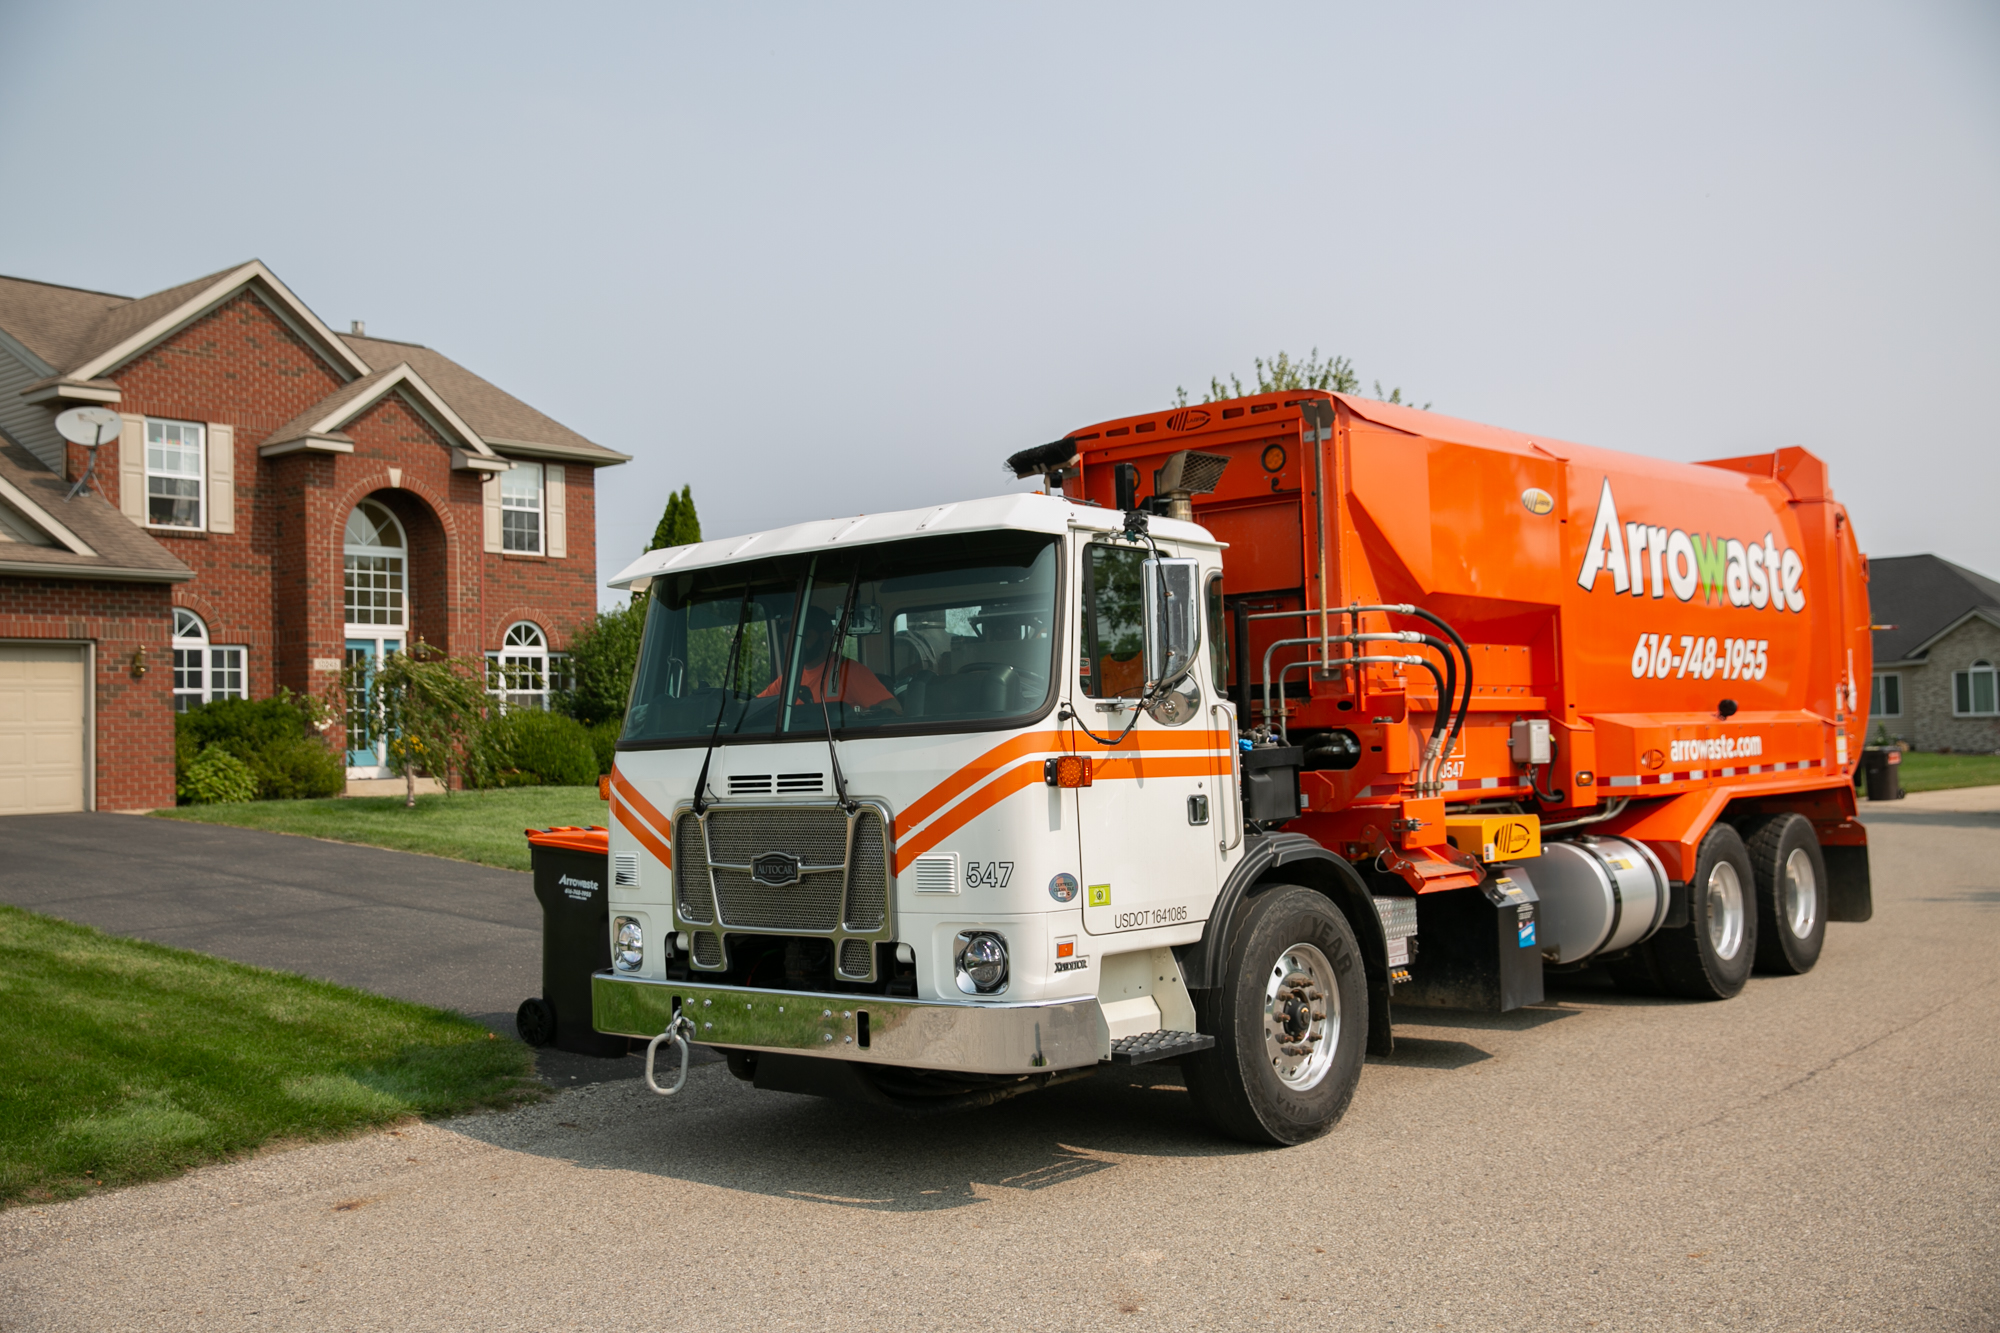 Four Benefits Of Working With A Trash Removal Service - Arrowaste